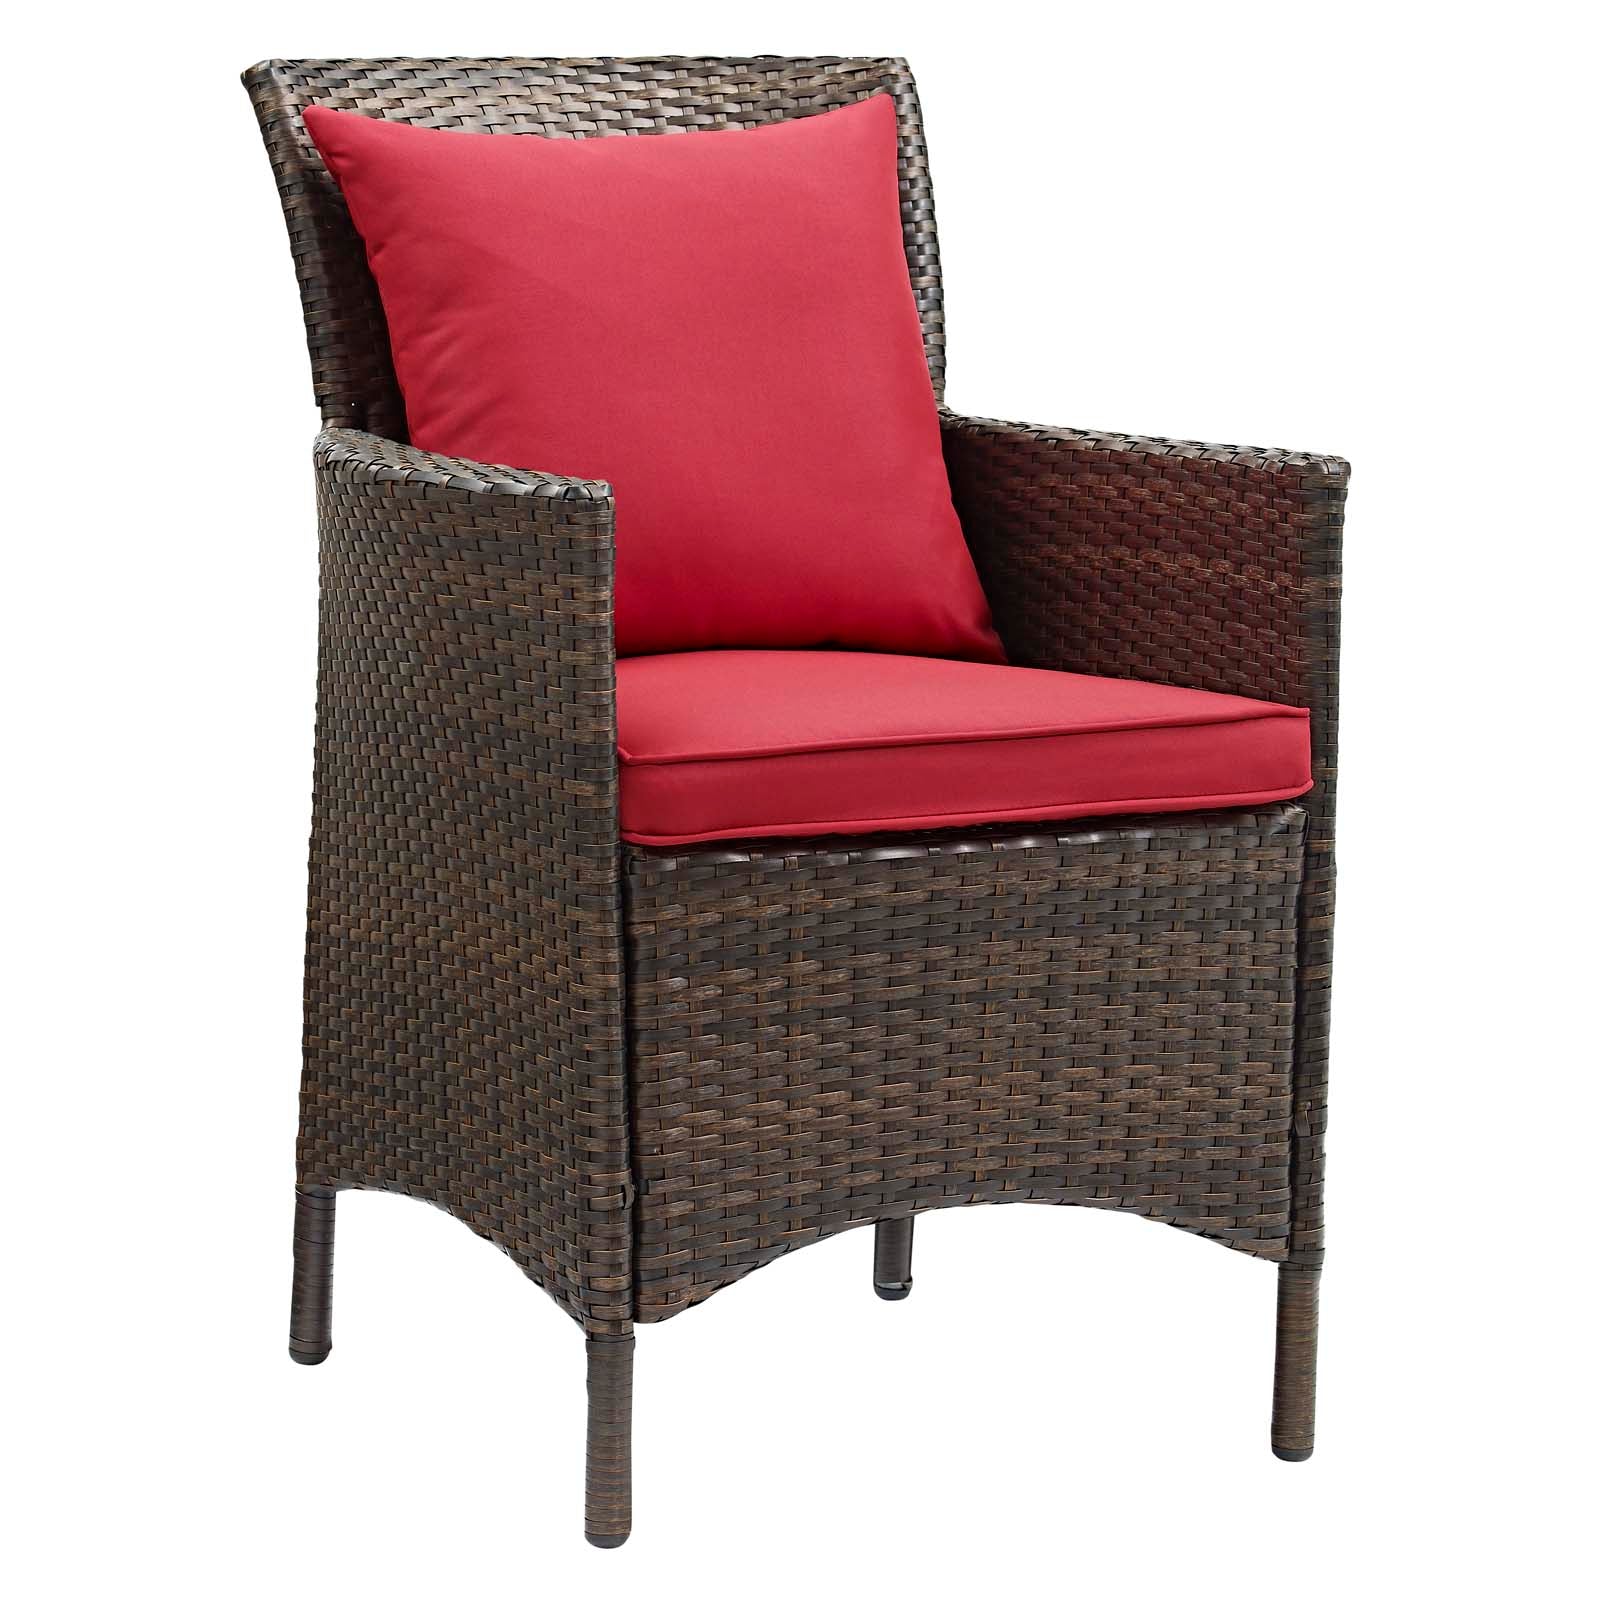 Modway Outdoor Dining Chairs - Conduit Outdoor Patio Wicker Rattan Dining Armchair Brown Red